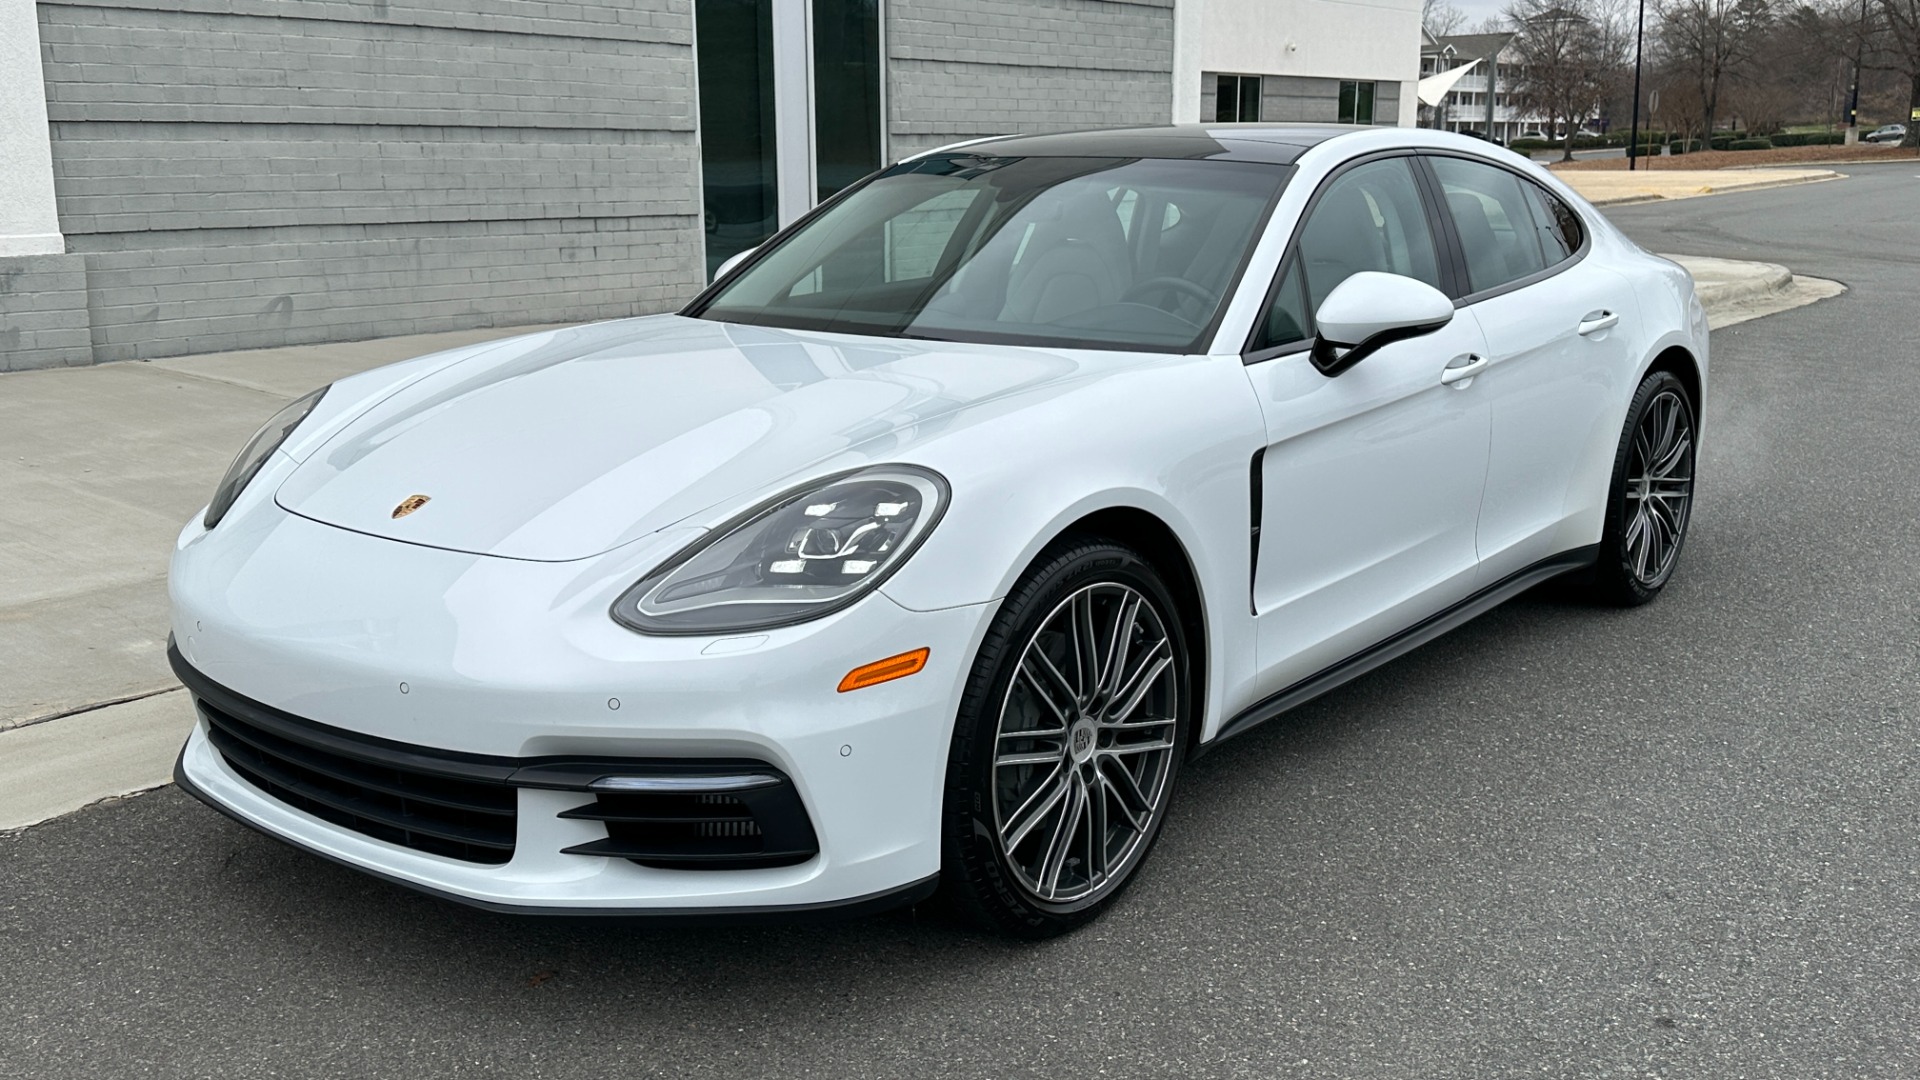 Used 2017 Porsche PANAMERA 4S / AWD / 2.9L TURBO / PREMIUM / SPORT CHRONO / BOSE / REARVIEW for sale Sold at Formula Imports in Charlotte NC 28227 2